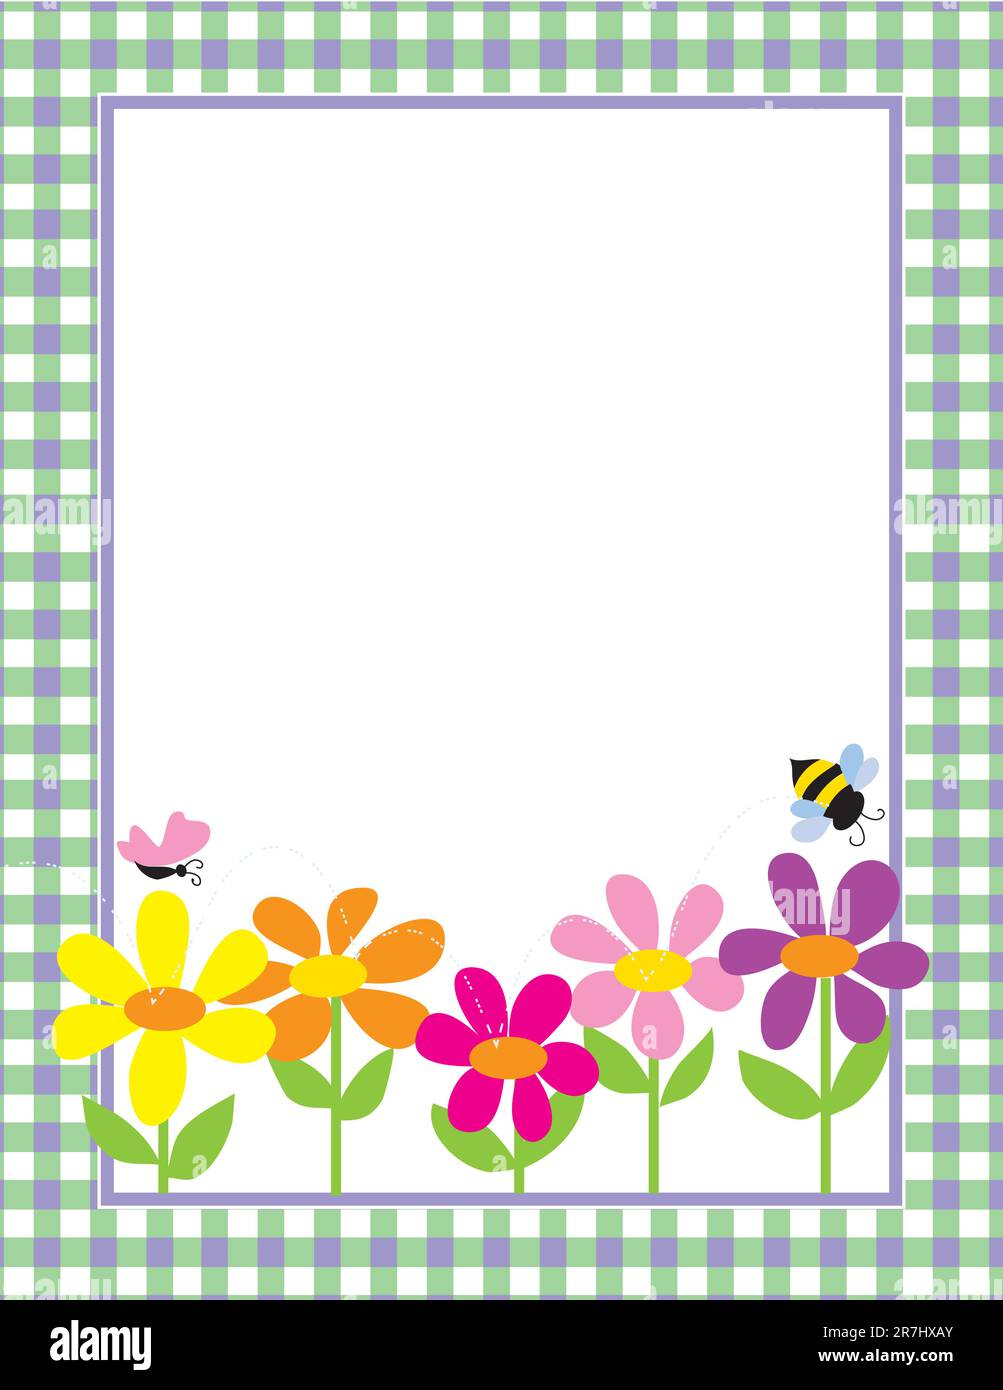 A border or frame featuring a row of colorful daisies, a butterfly and a bee Stock Vector